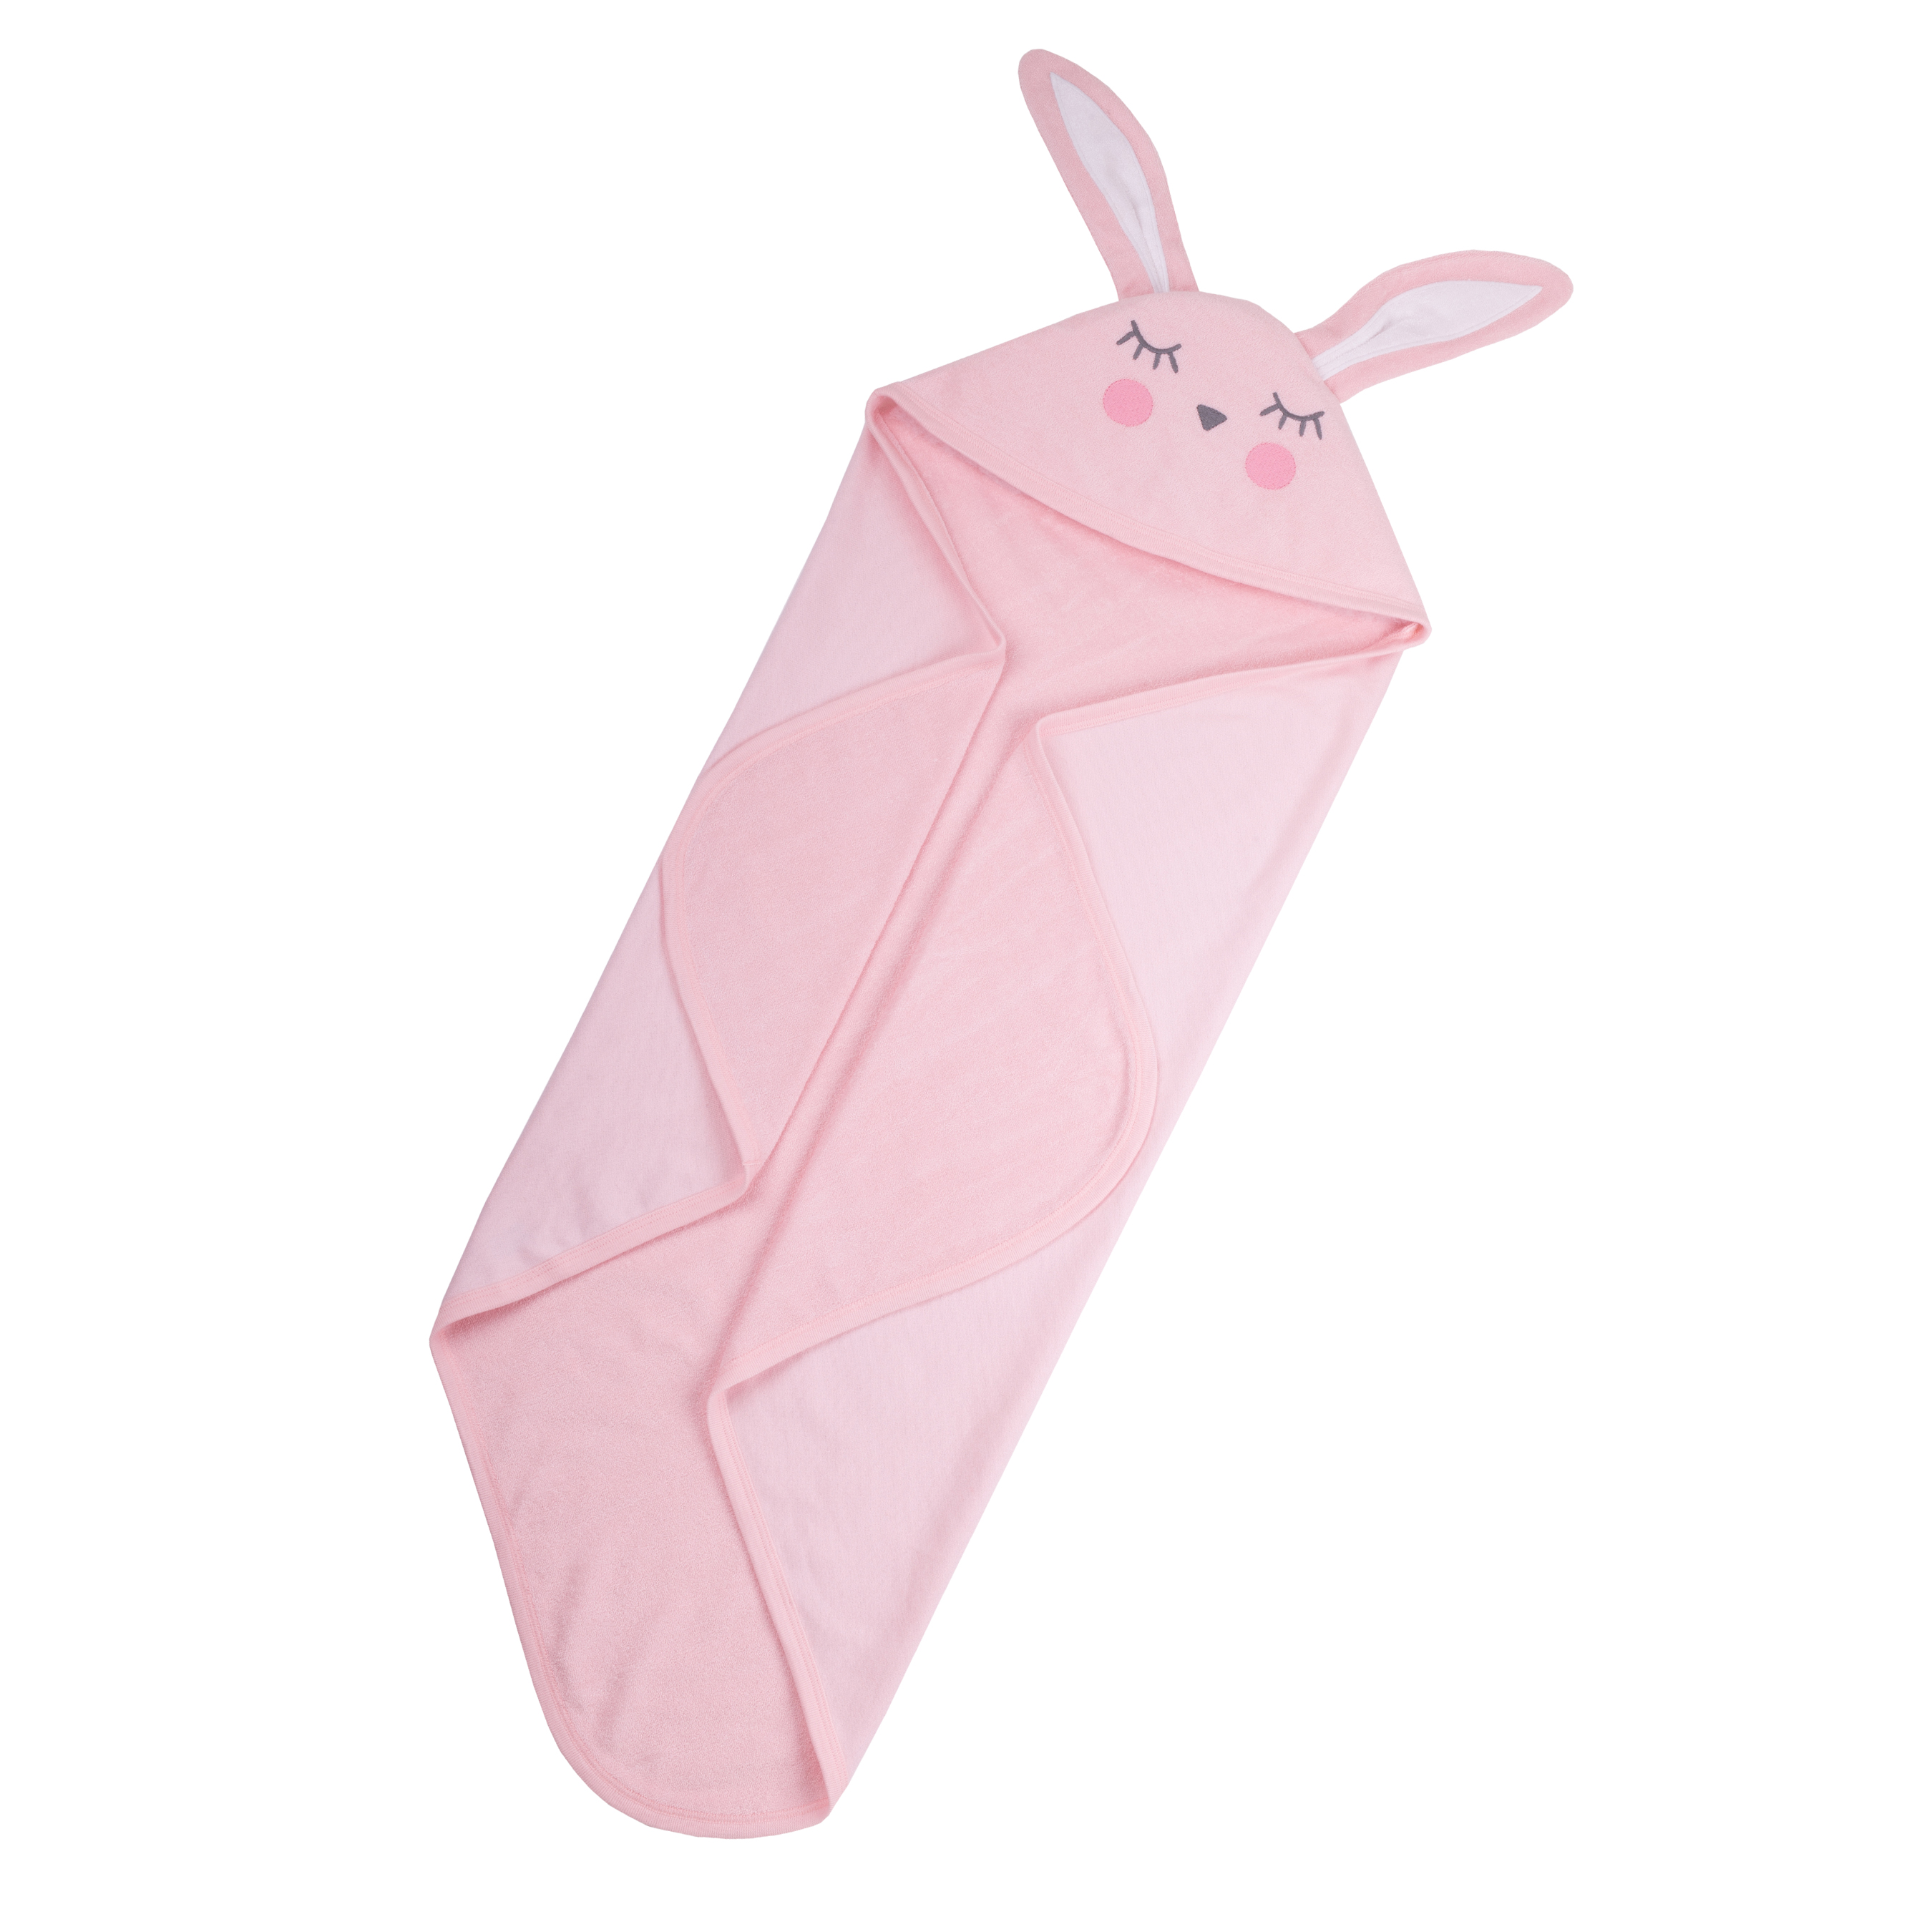 Little Star Organic Terry Cloth Hooded Bath Towel, Pink Bunny - image 5 of 5